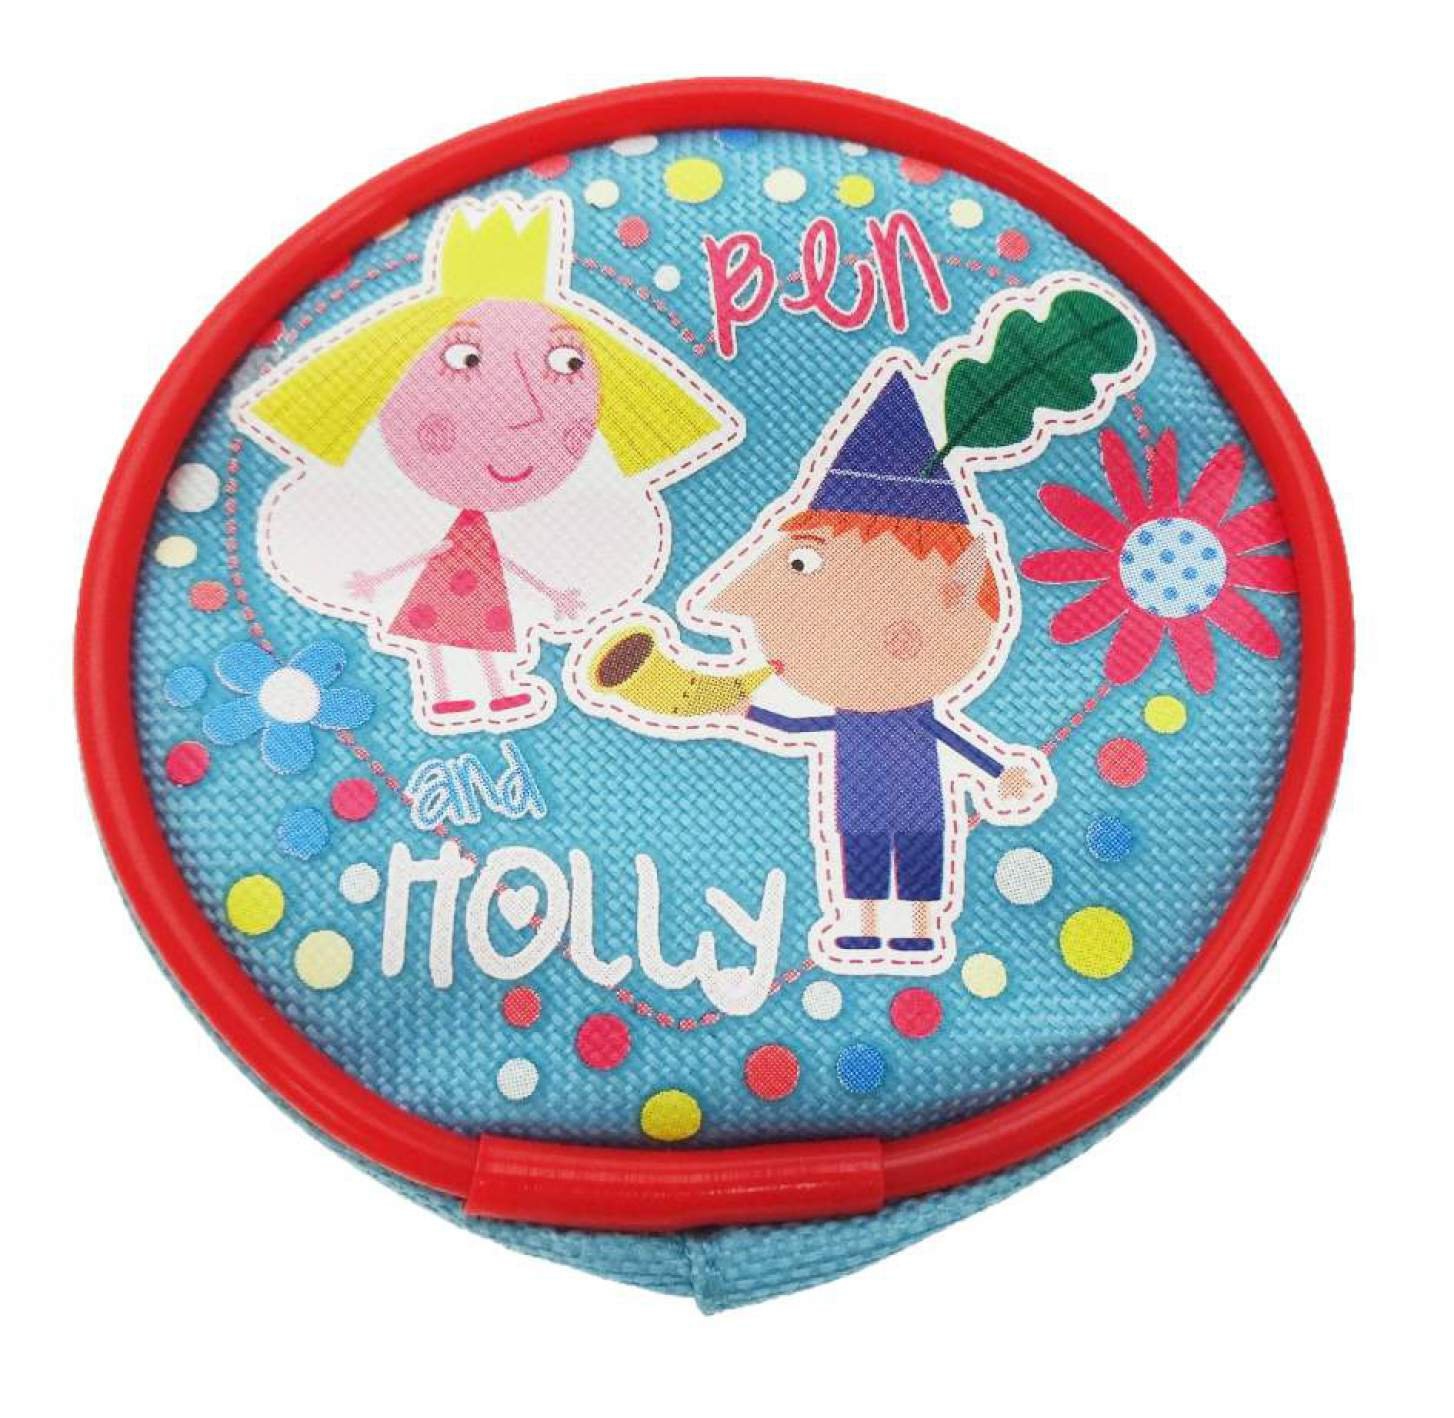 Ben and Holly Purse